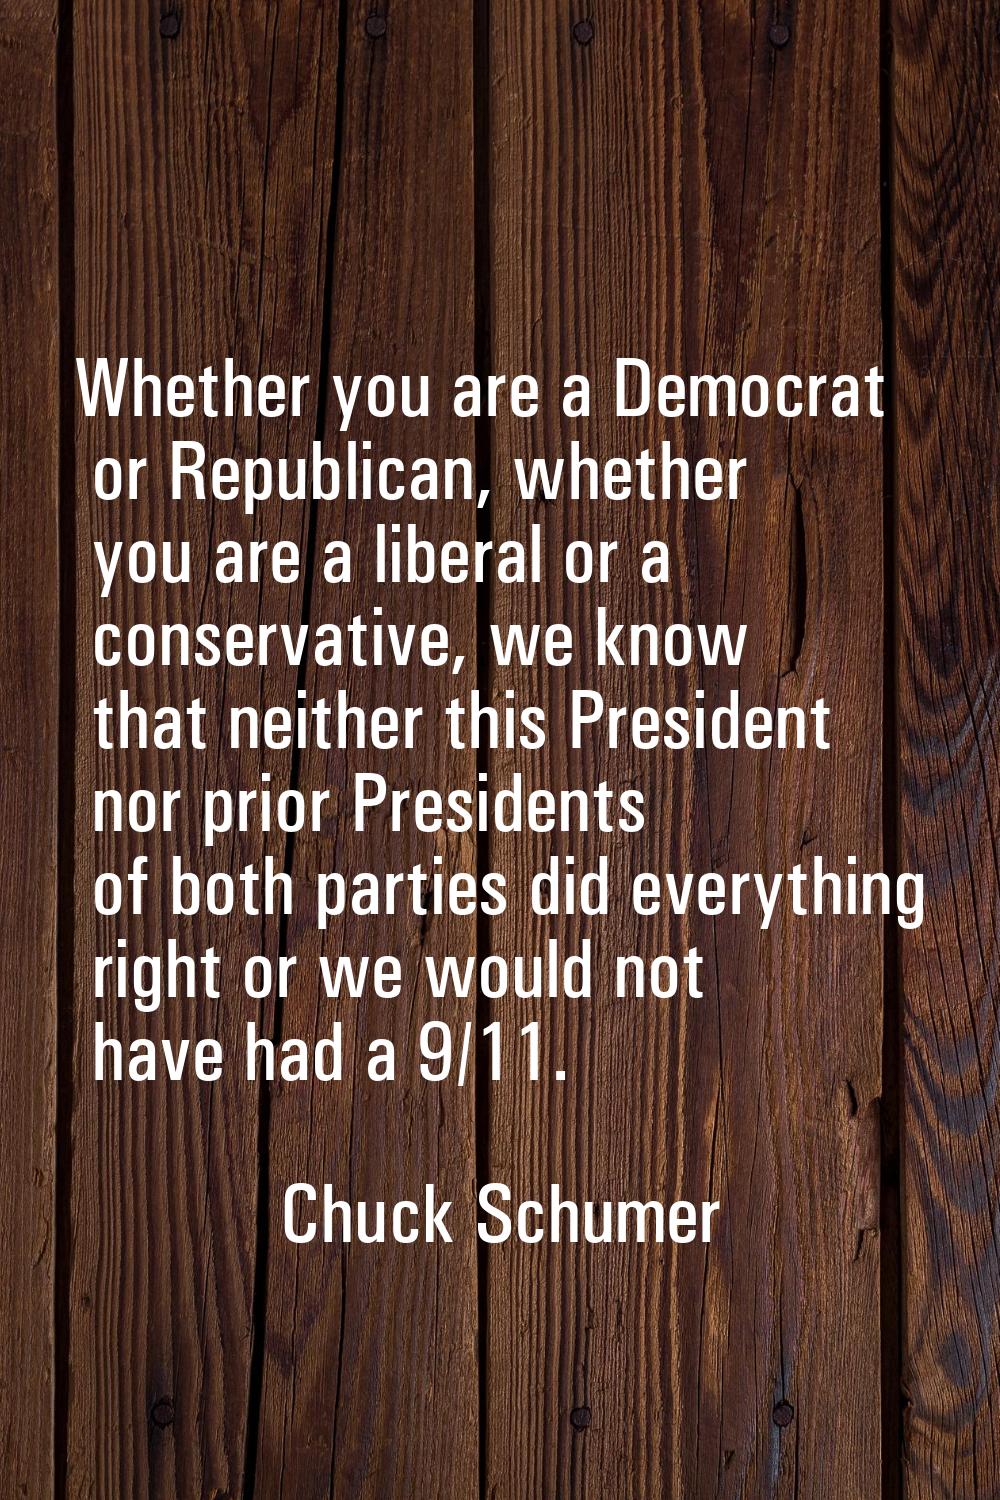 Whether you are a Democrat or Republican, whether you are a liberal or a conservative, we know that